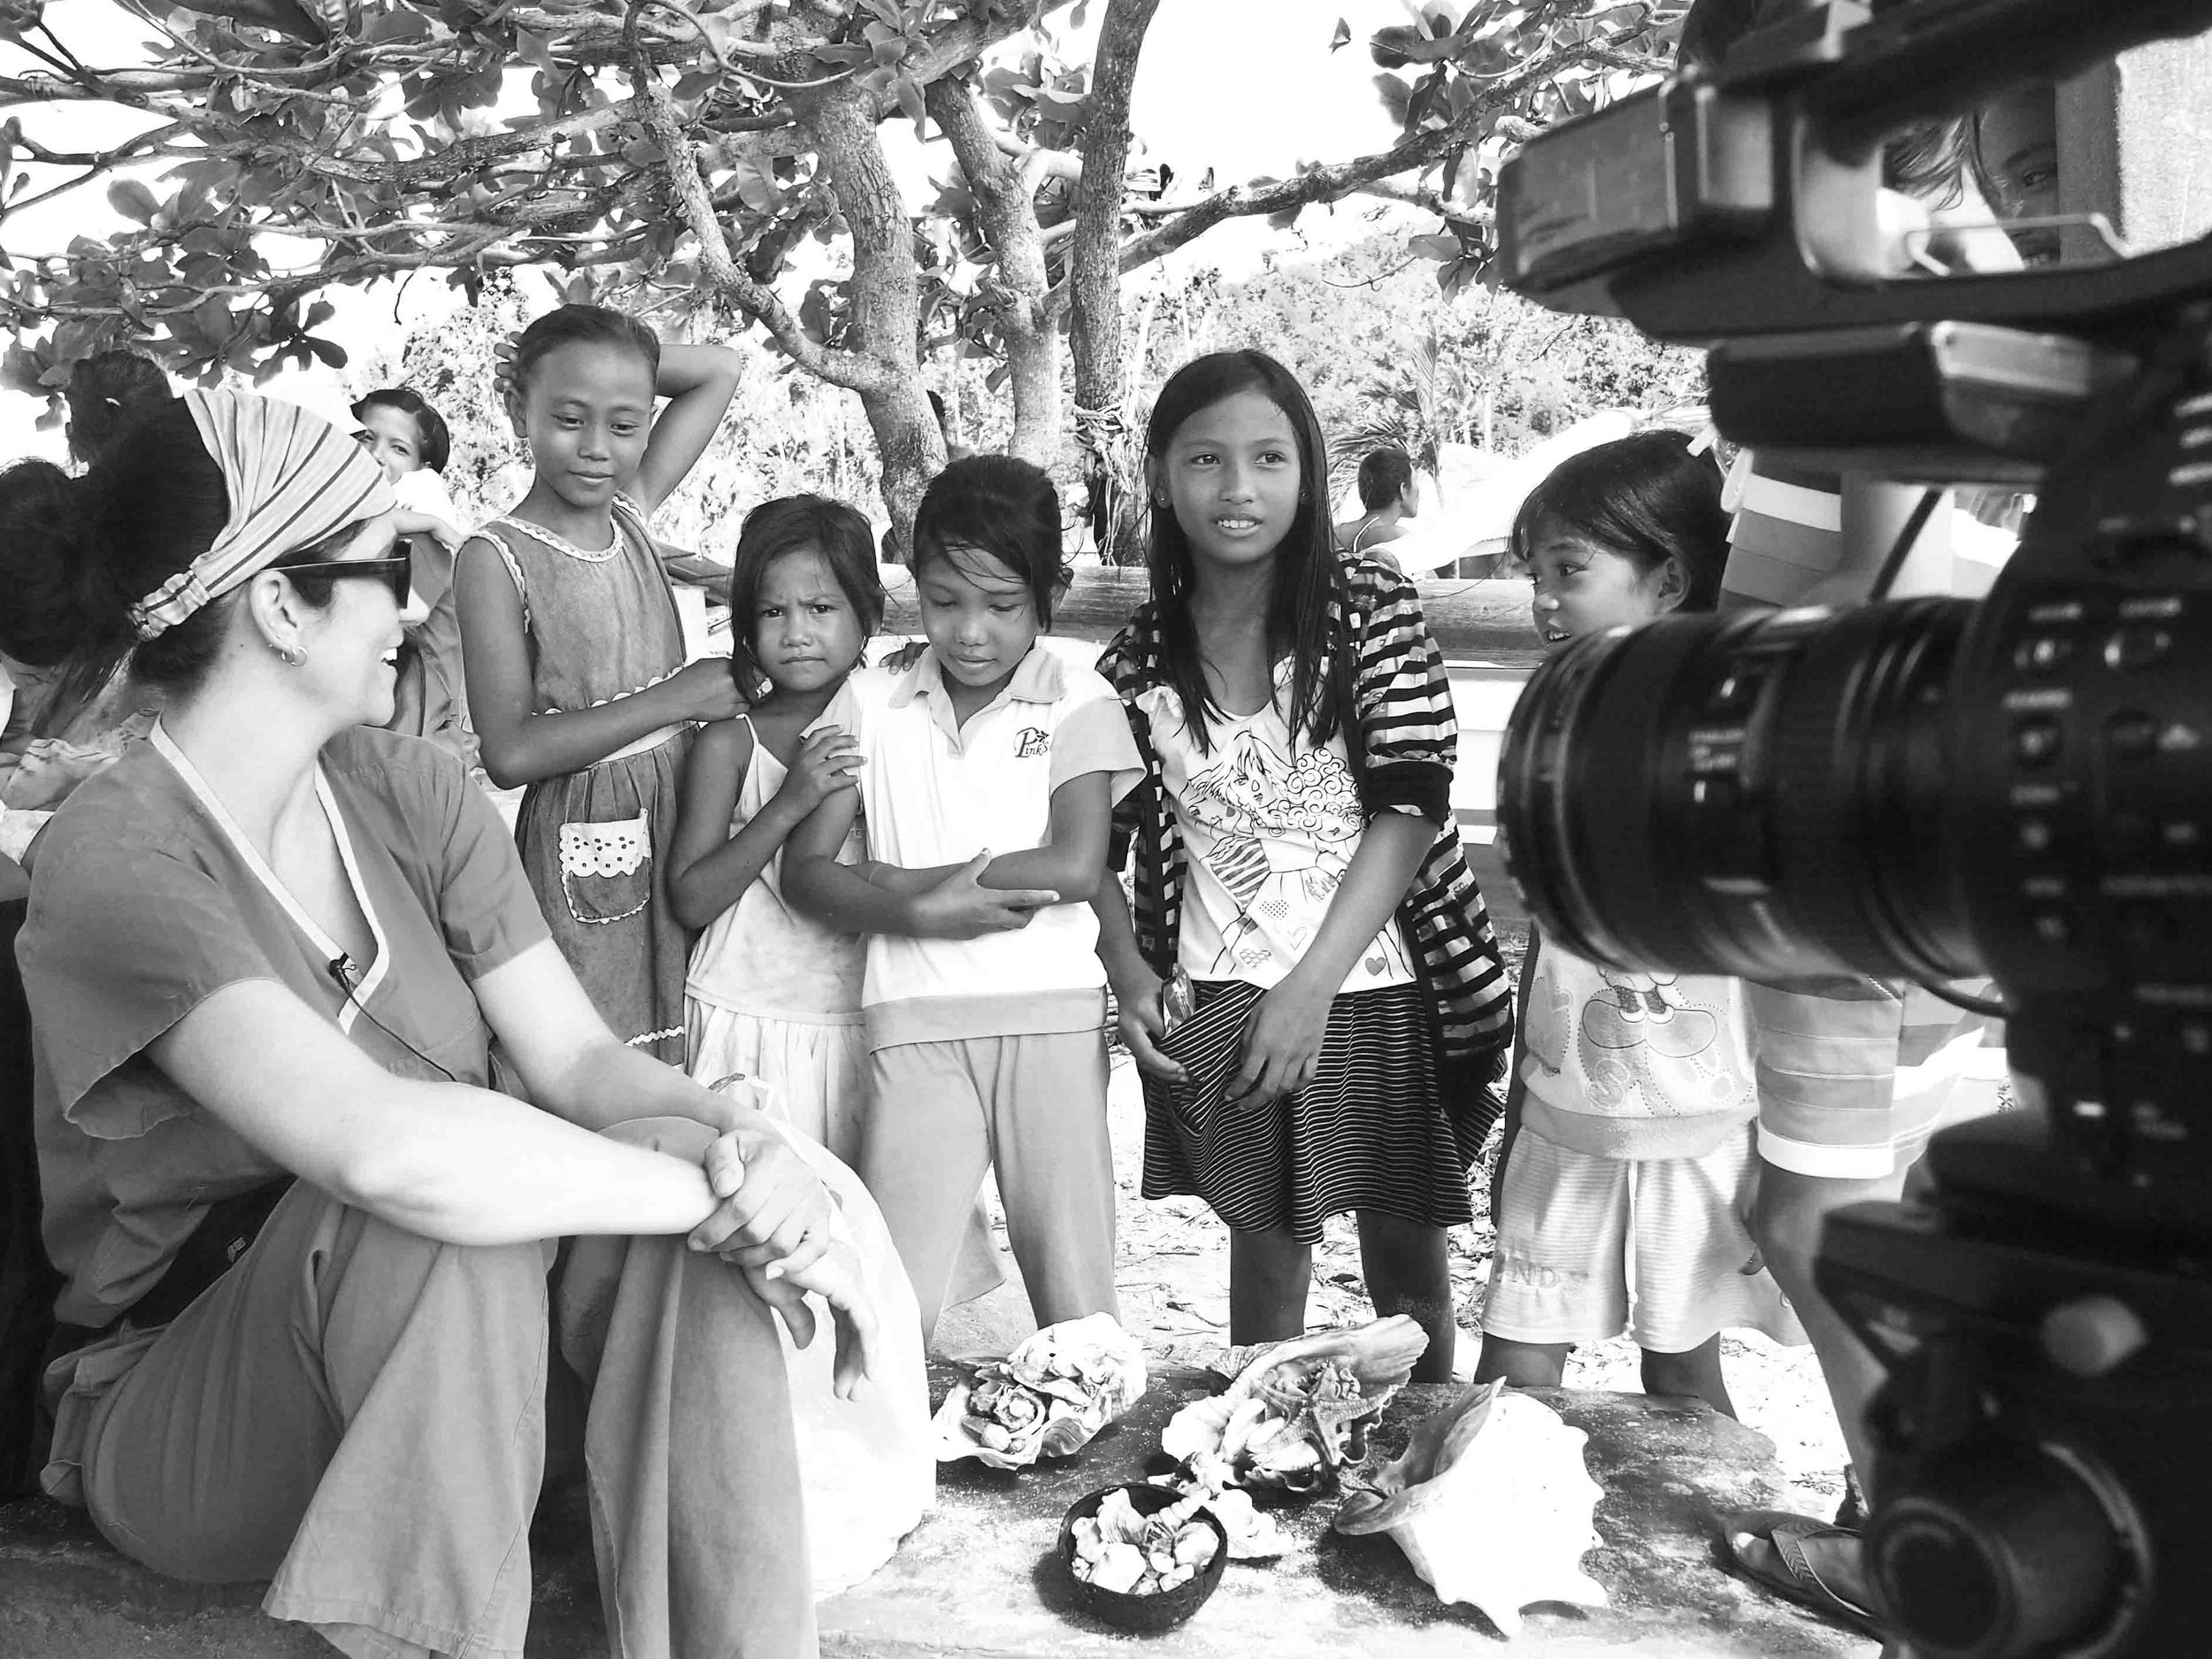  Erin L. FitzGerald behind the camera on Olotayan Island in the Philippines, documenting nurses providing aid in the aftermath of Typhoon Haiyan/Yolanda. Photo by Erin L. FitzGerald. 